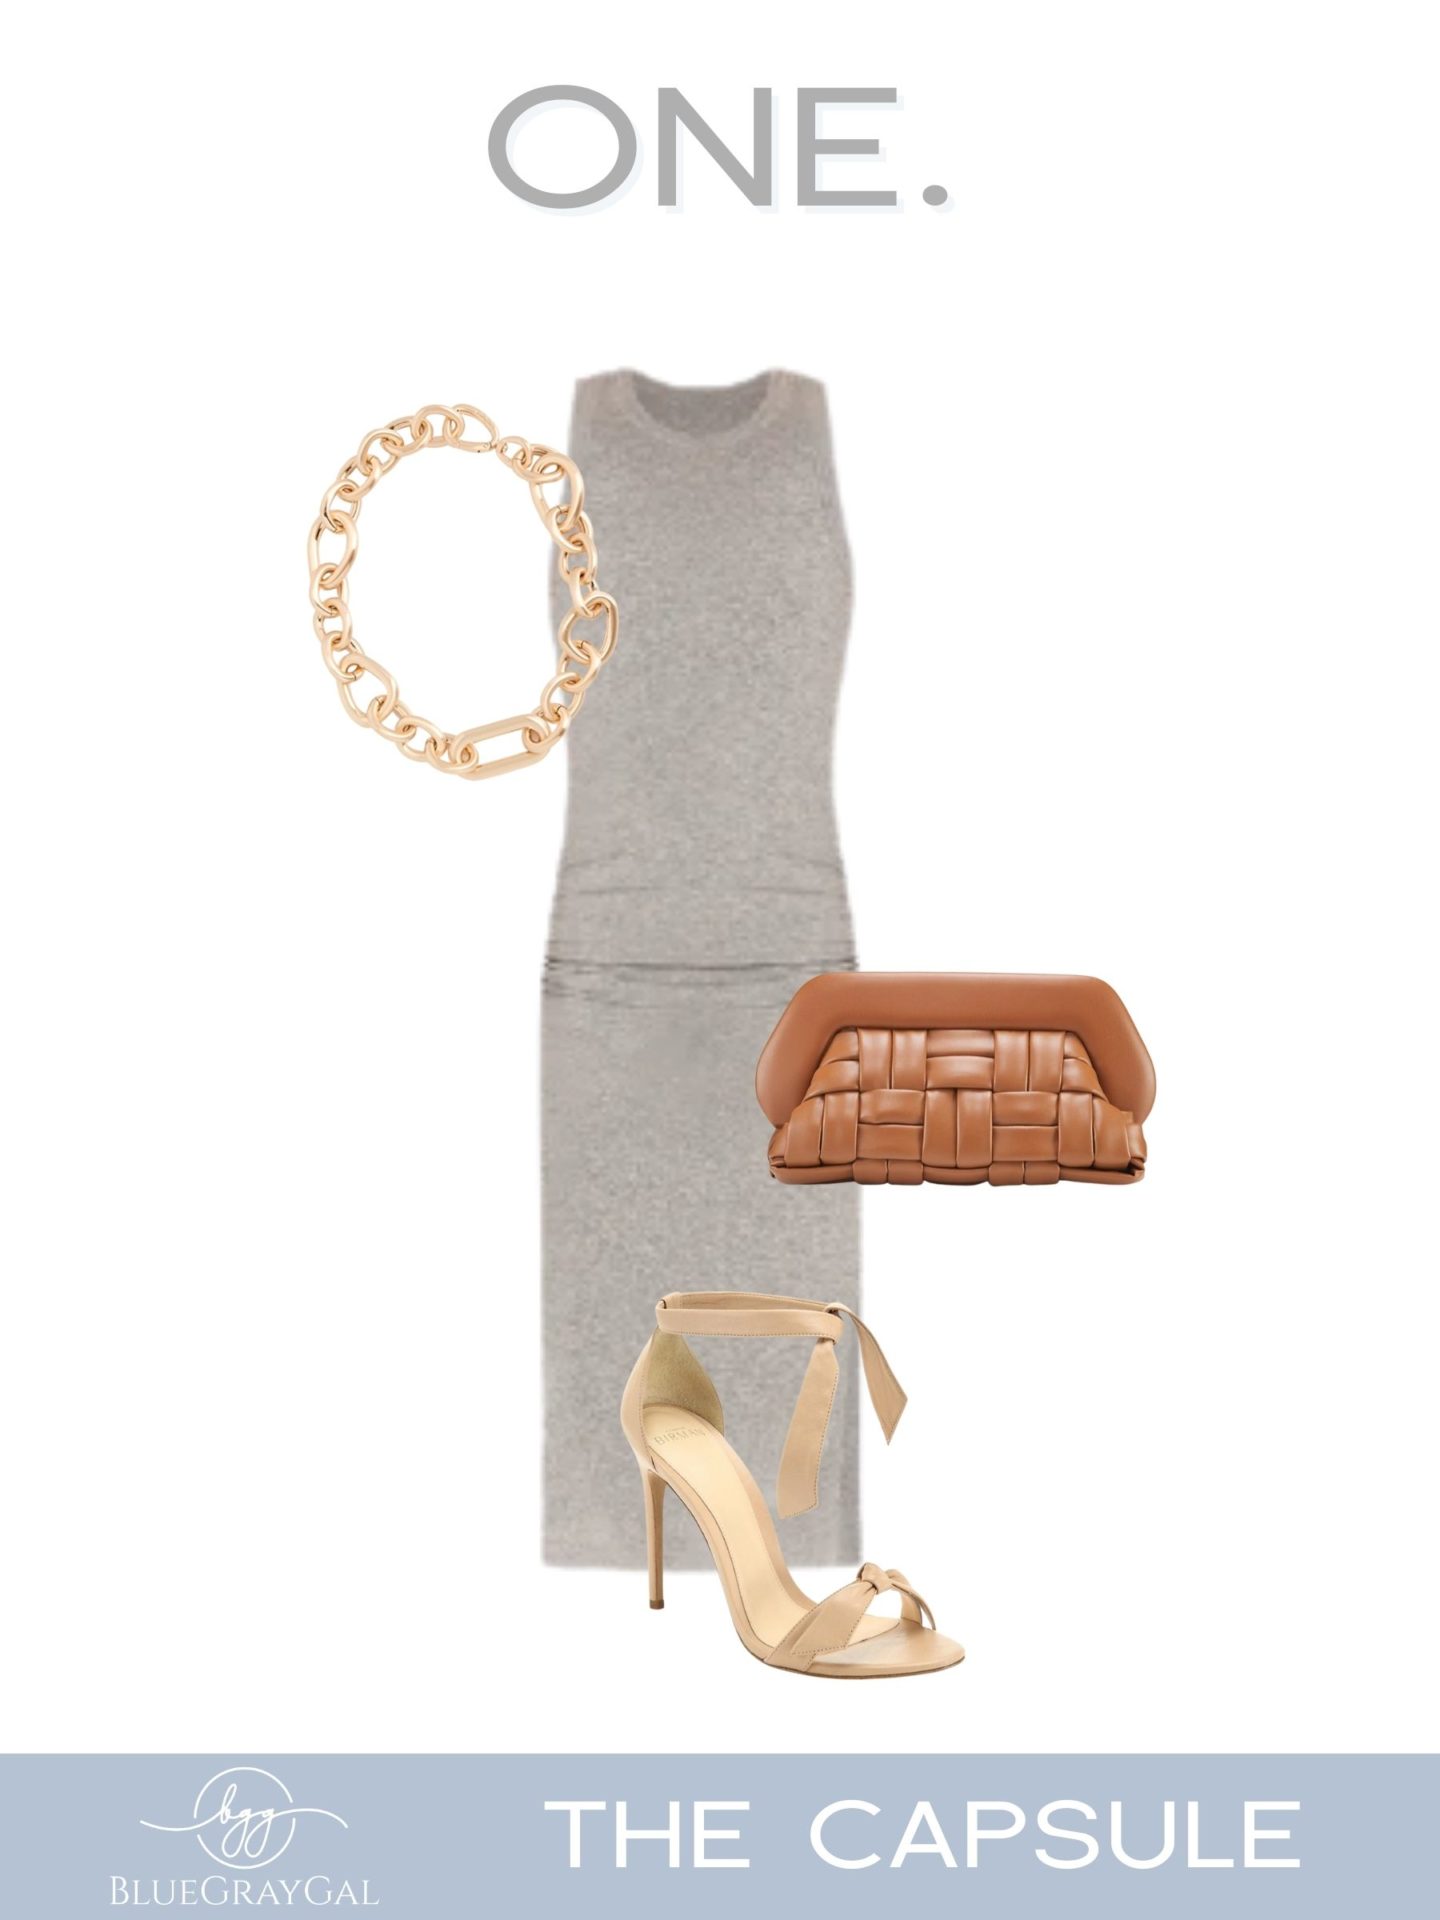 A spring travel capsule wardrobe with gray dress, leather handbag and nude sandals.